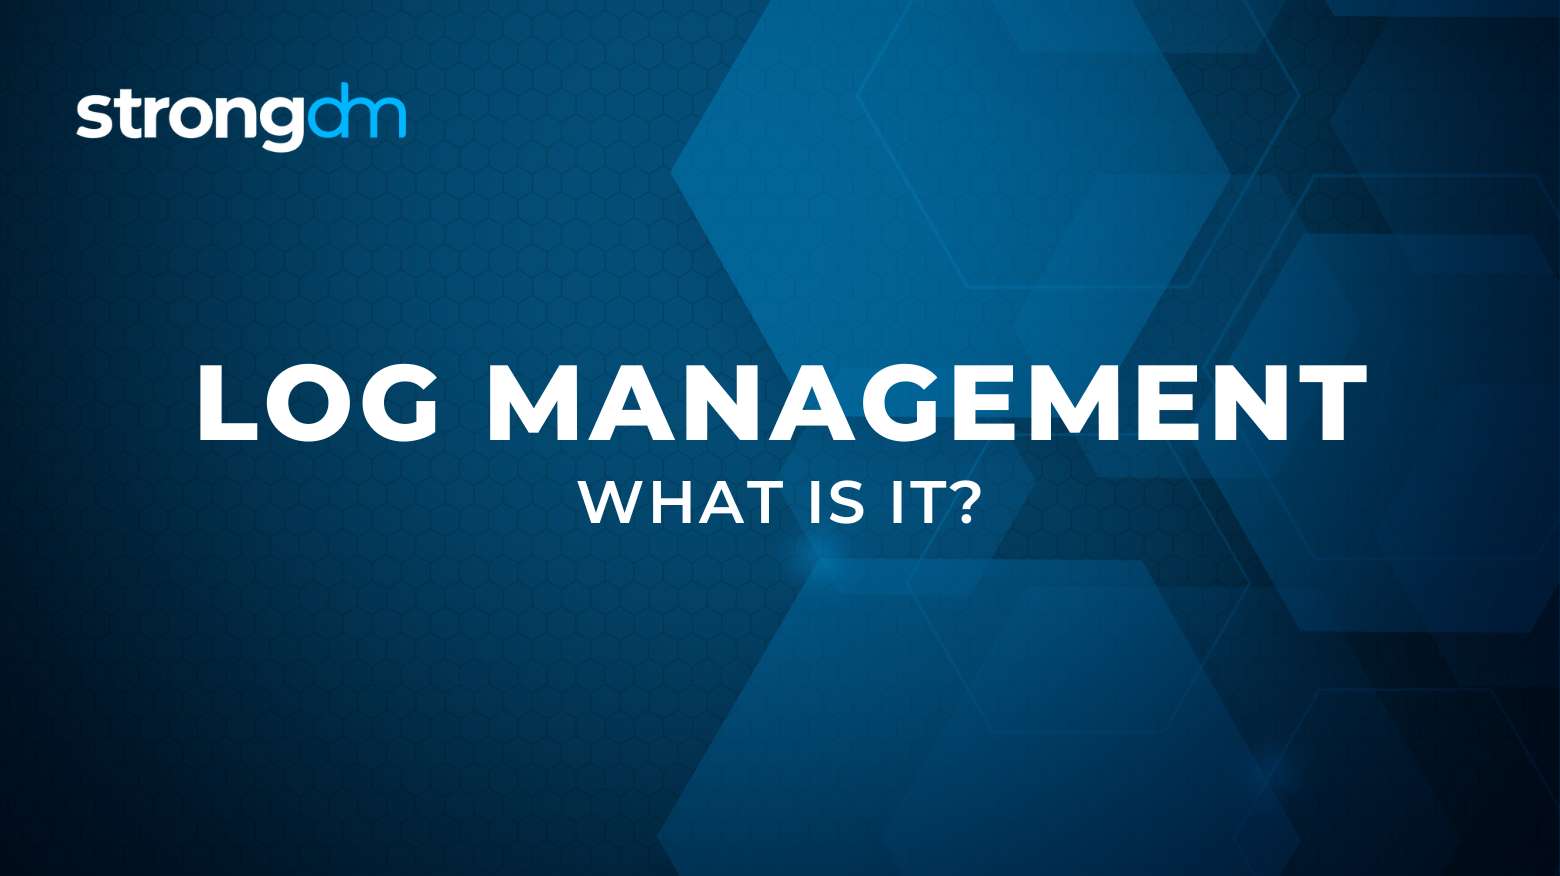 What Is Log Management?